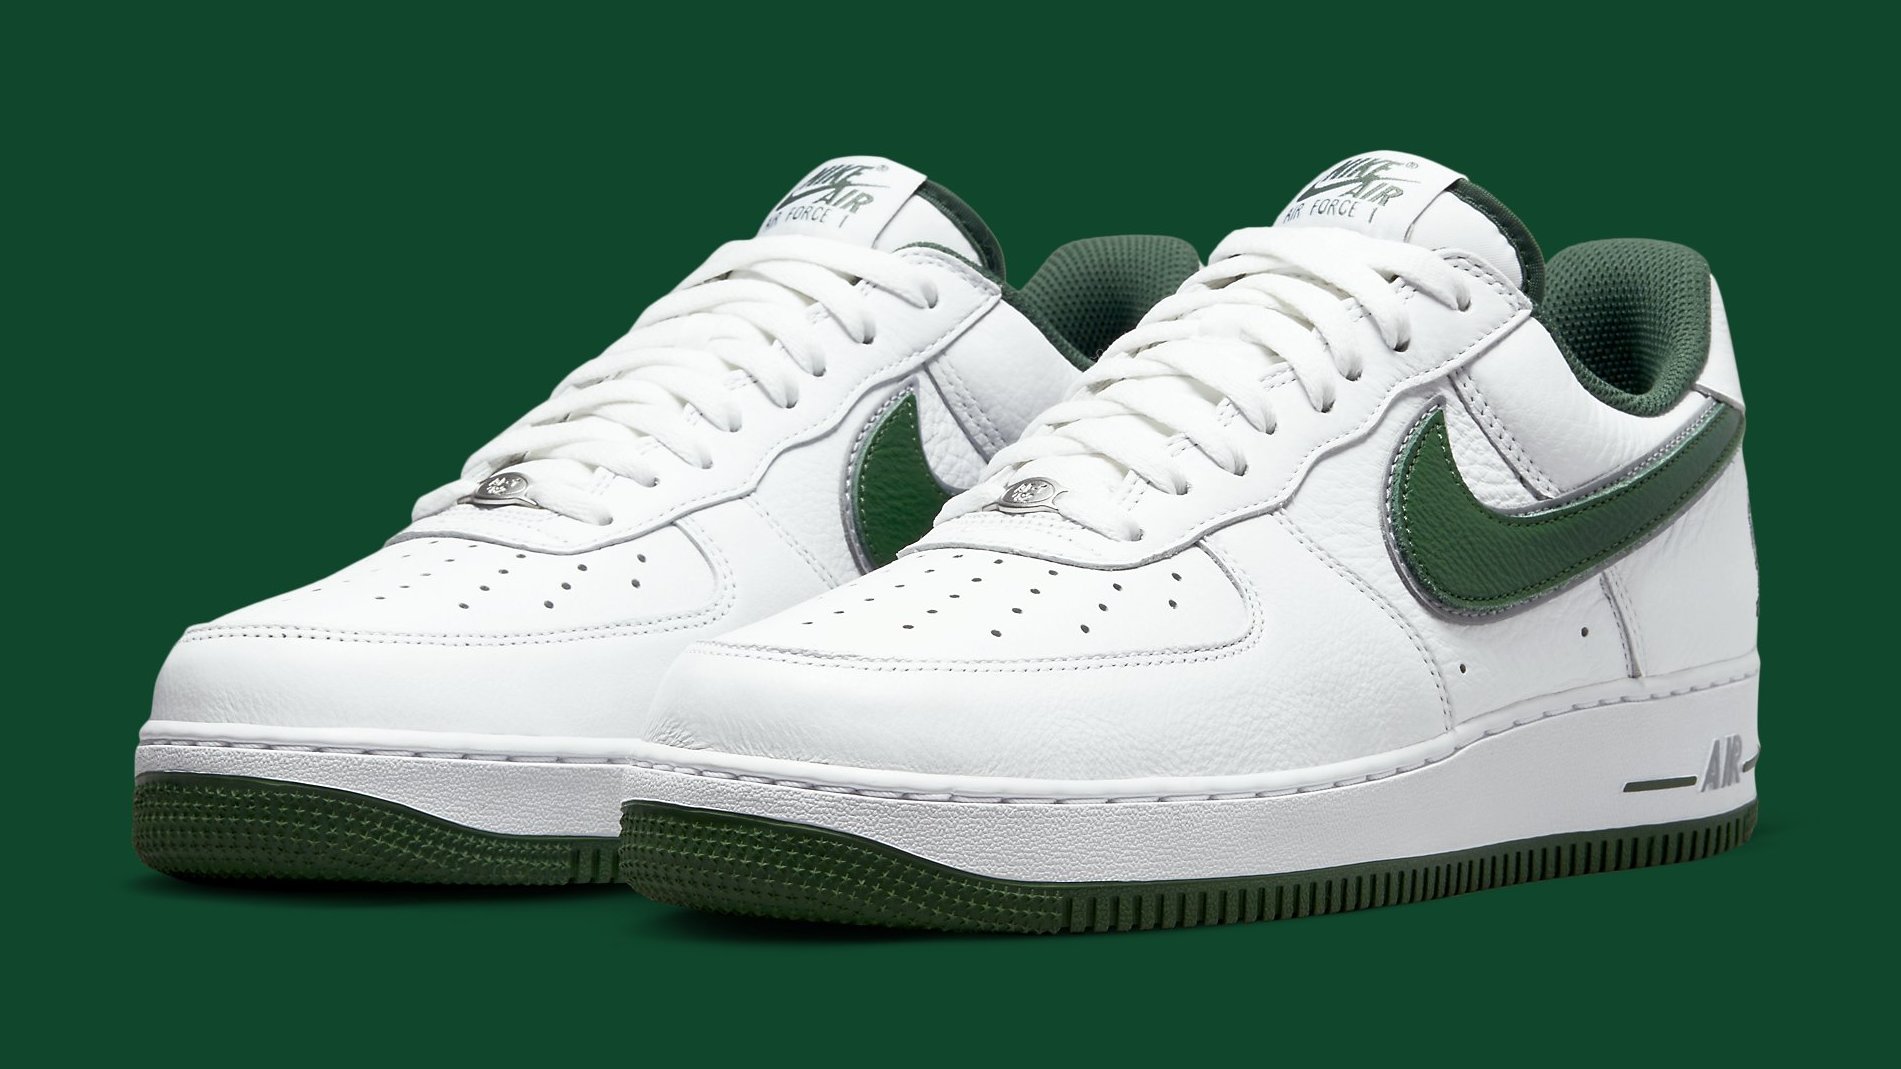 Dader Bekwaam Mail Detailed Look at This Year's 'Four Horsemen' Nike Air Force 1 | Complex